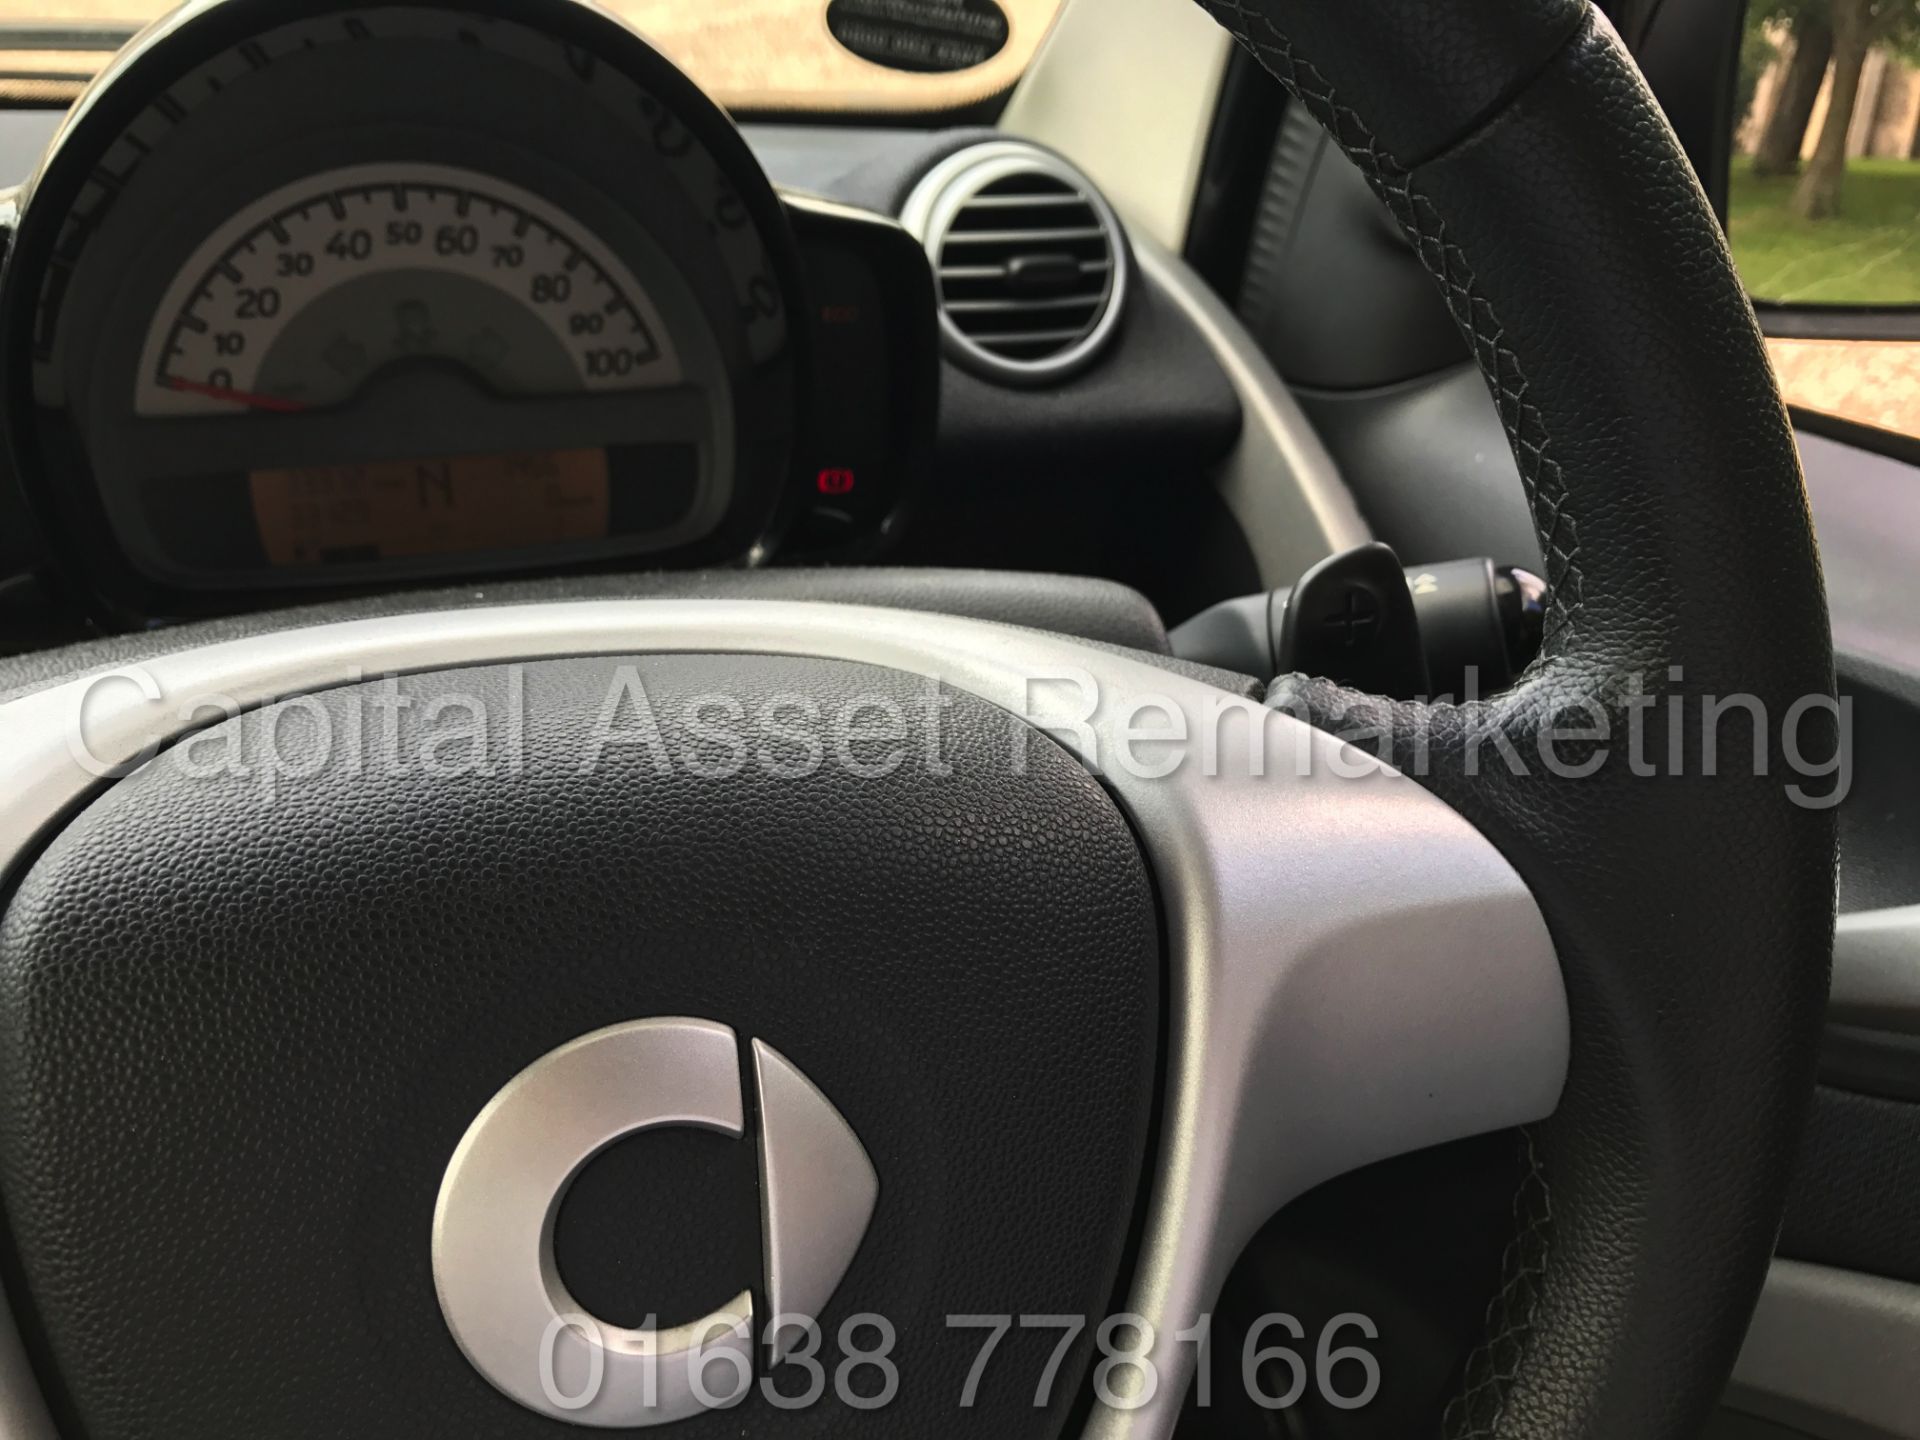 SMART FORTWO 'EDITION 21' (2015 MODEL) 'MHD - AUTO - A/C - STOP / START' (70 MPG +) - Image 26 of 28